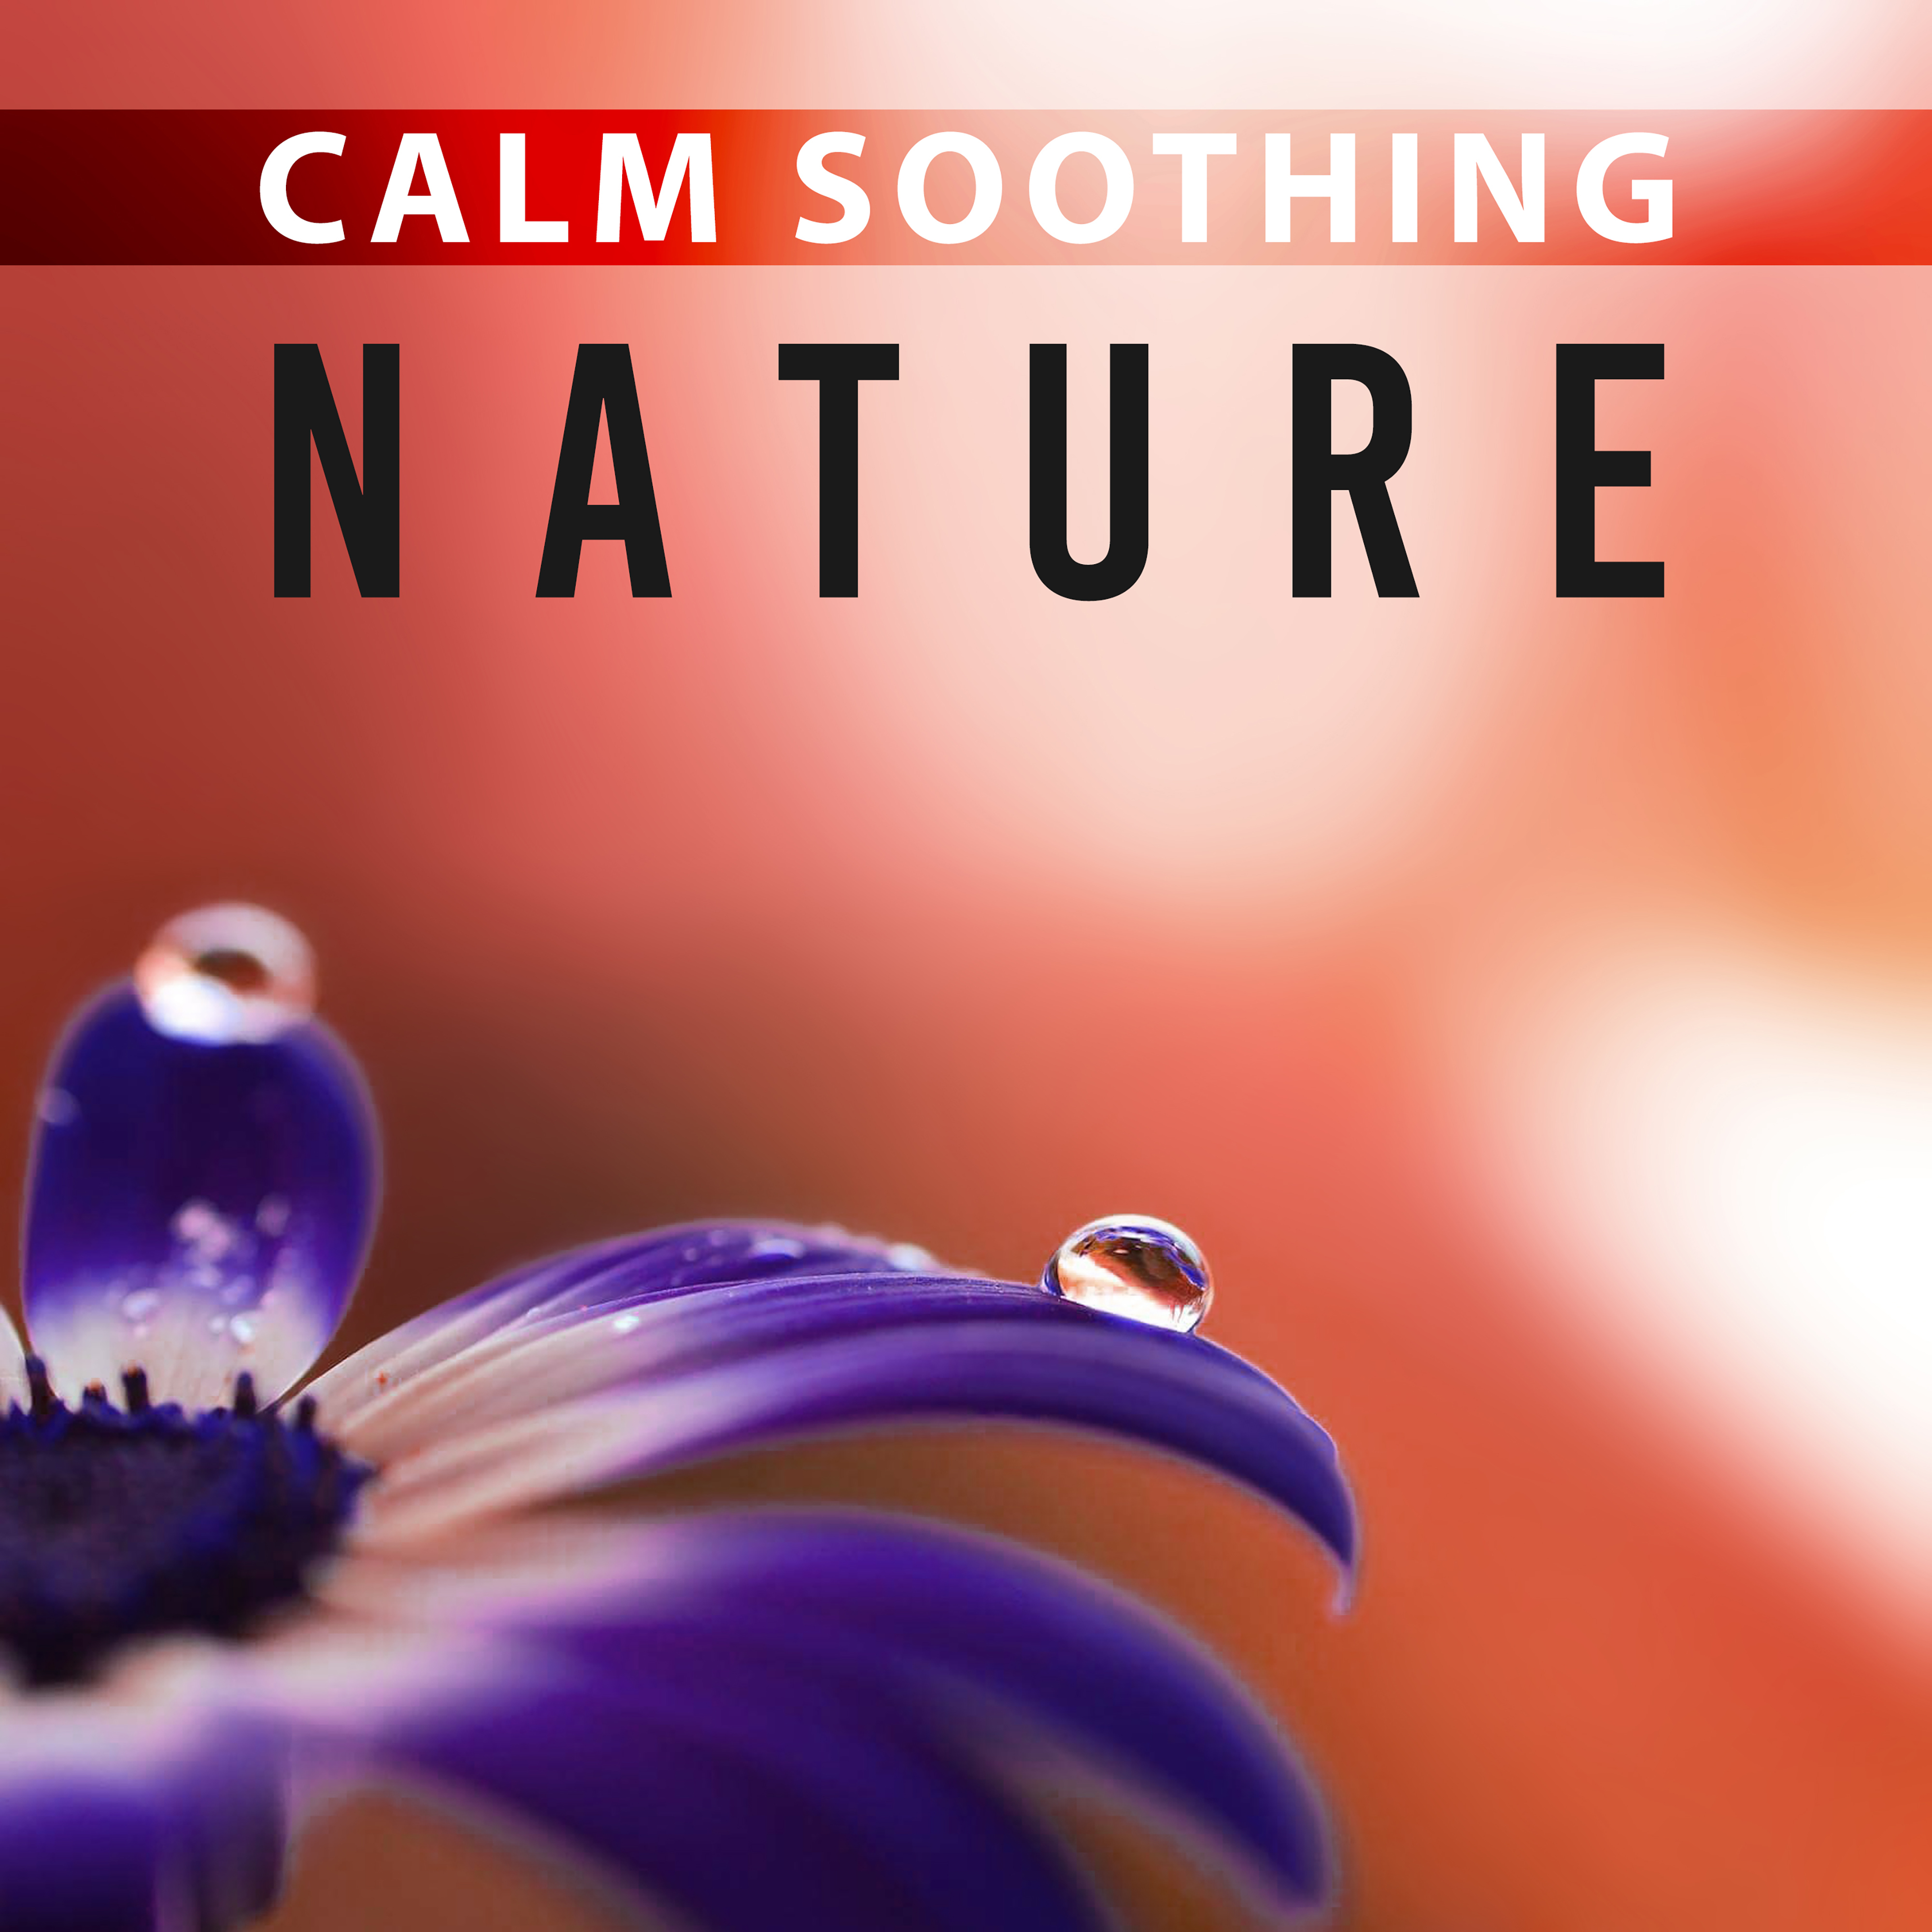 Calm Soothing Nature – Calm Nature Sounds, Earth Music, Peaceful Nature, Tranquil Music, Deep Rest